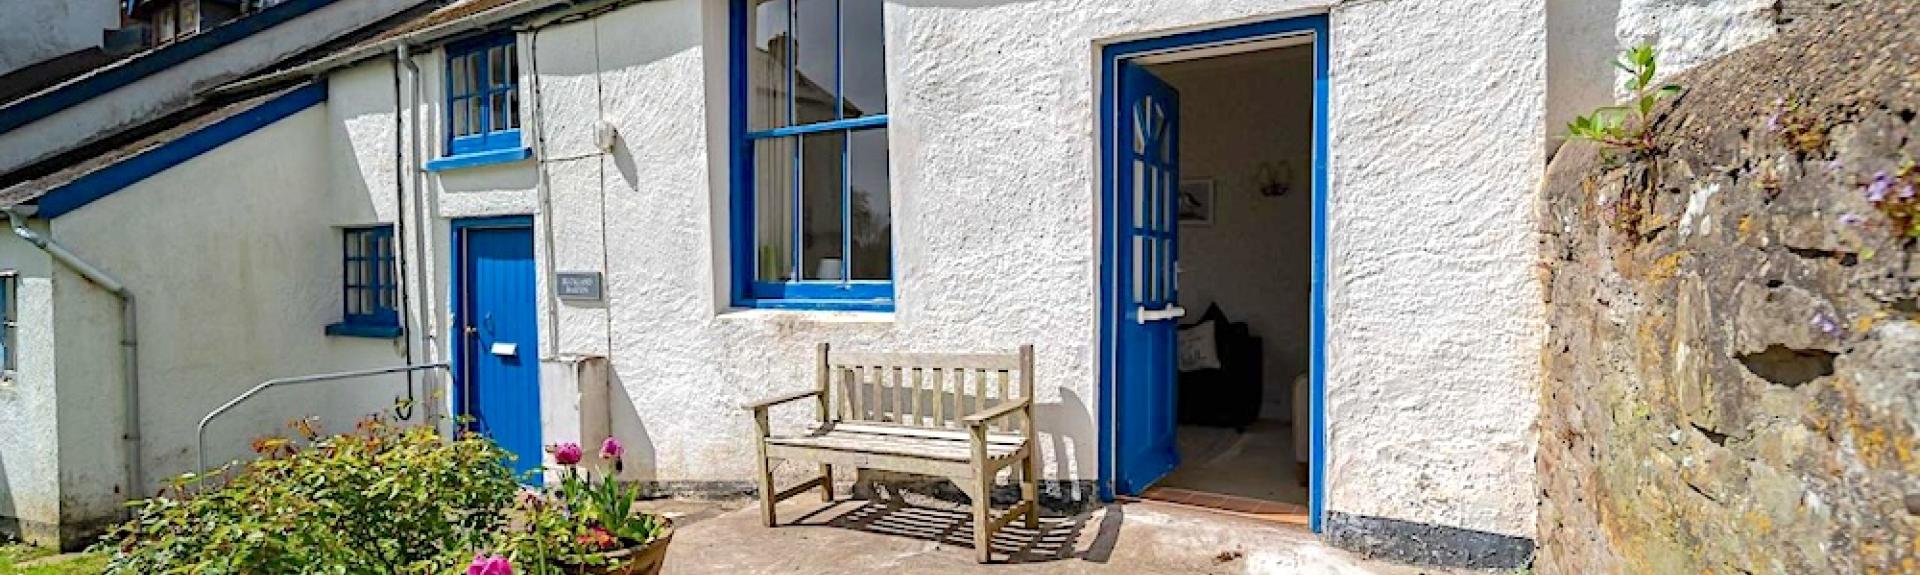 Exterior of a single storey holiday cottage overlooking a courtyard.